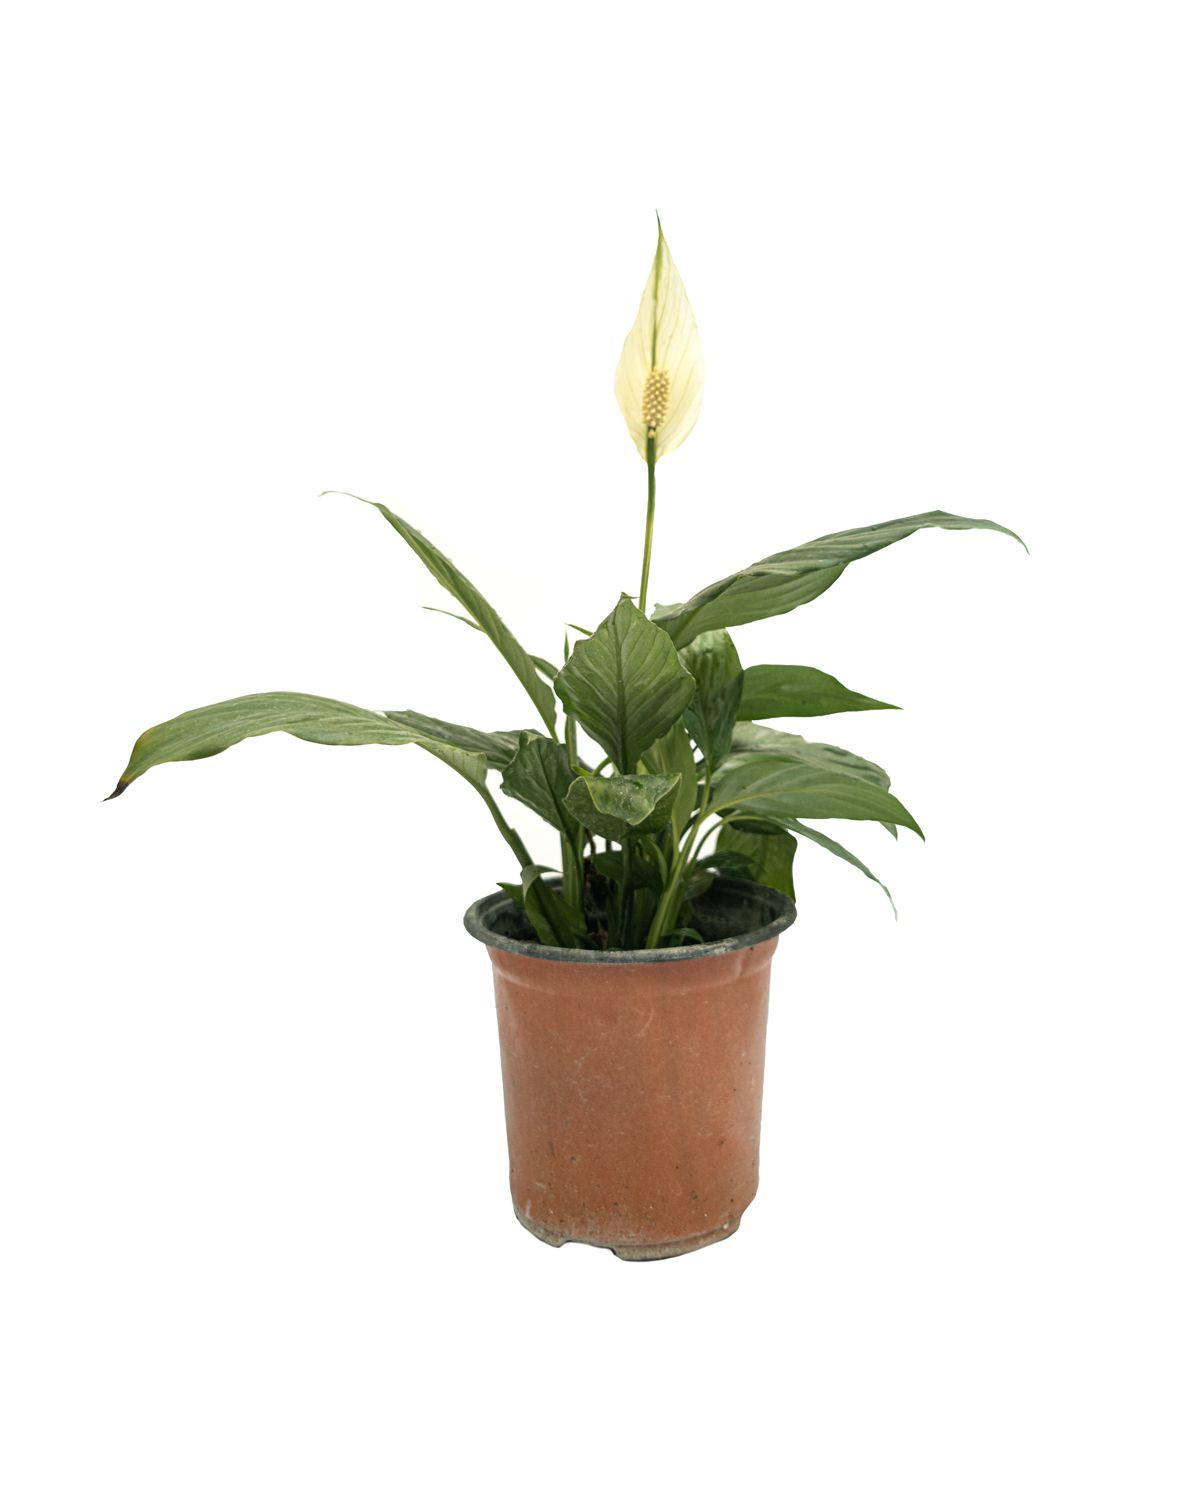 In-house peace lily